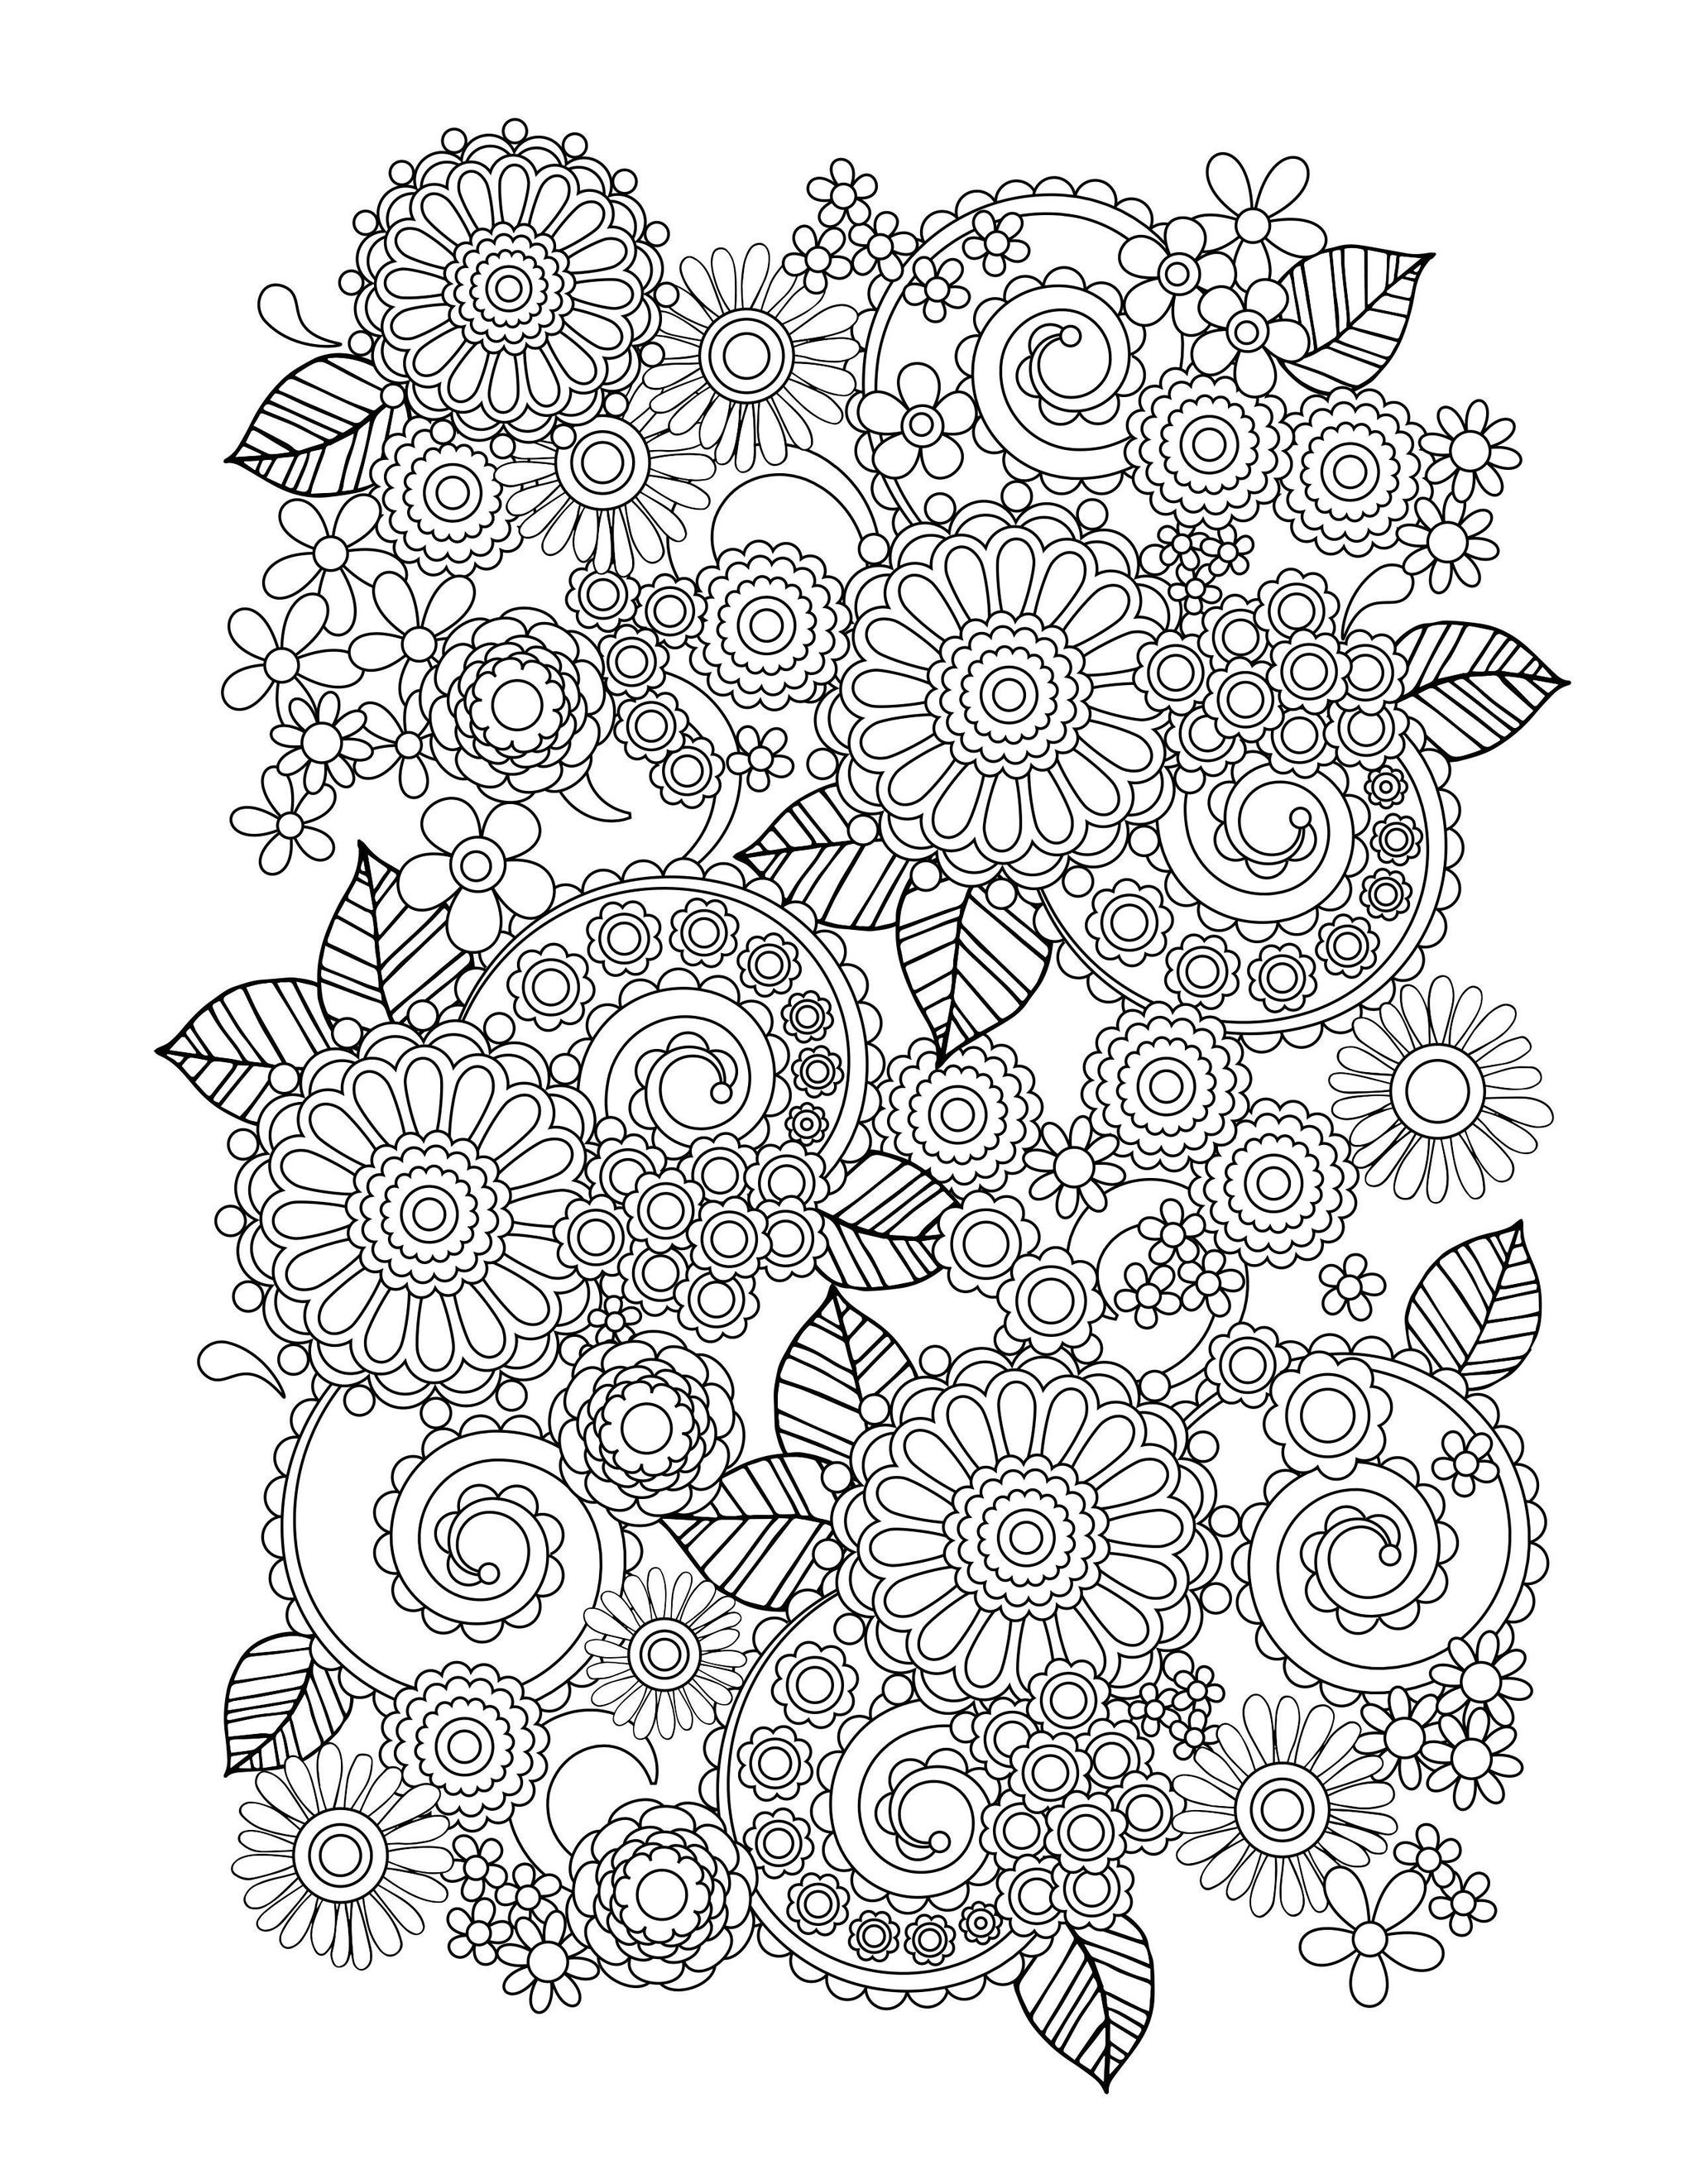 Colour It! | Adult Coloring Pages, Free Coloring ...